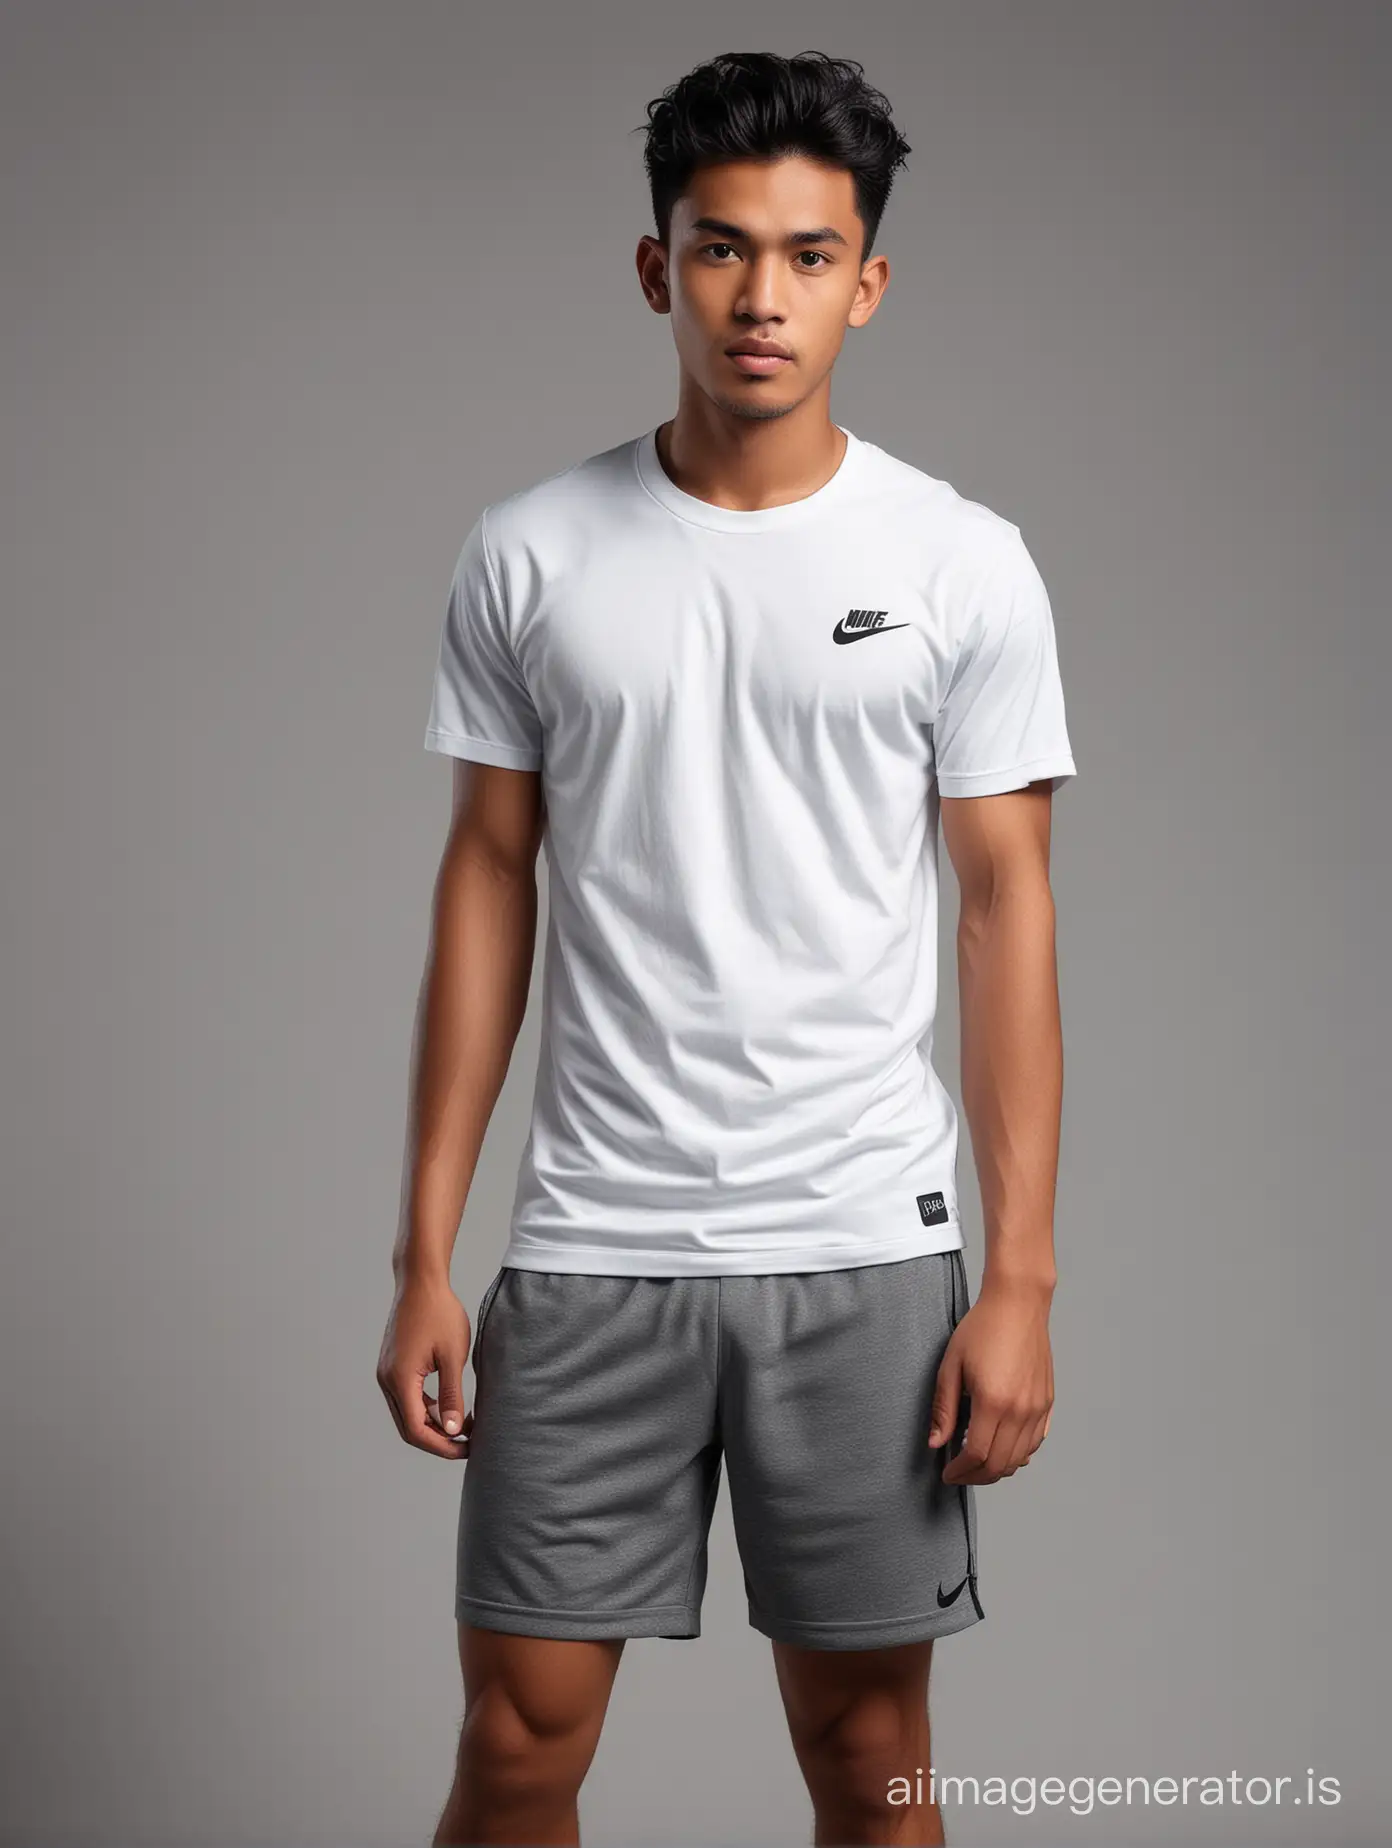 A handsome young Indonesian, wearing white fit tee shirt Nike, with grey Nike underwear boxer. Standing for photoshoot, of Nike white sneakers. Black short hair with skin head style, a little curly. Macho and cute photo. Background charcoal black. 16K UHD.